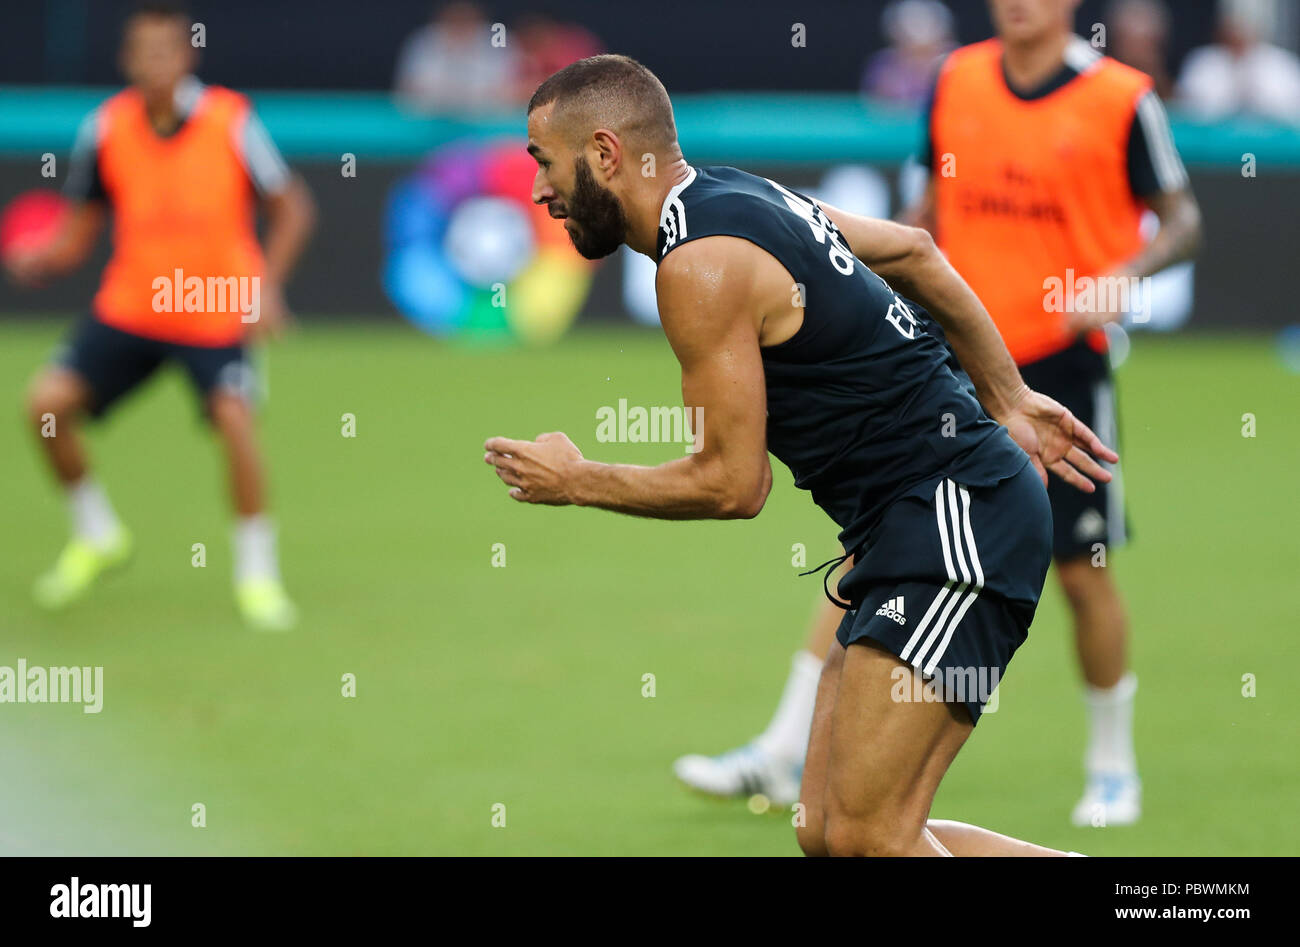 Miami Gardens, Florida, USA. 30th July, 2018. Real Madrid C.F. forward Karim Mostafa Benzema in action during an open training session for the International Champions Cup match between Real Madrid C.F. and Manchester United F.C. at the Hard Rock Stadium in Miami Gardens, Florida. Credit: Mario Houben/ZUMA Wire/Alamy Live News Stock Photo